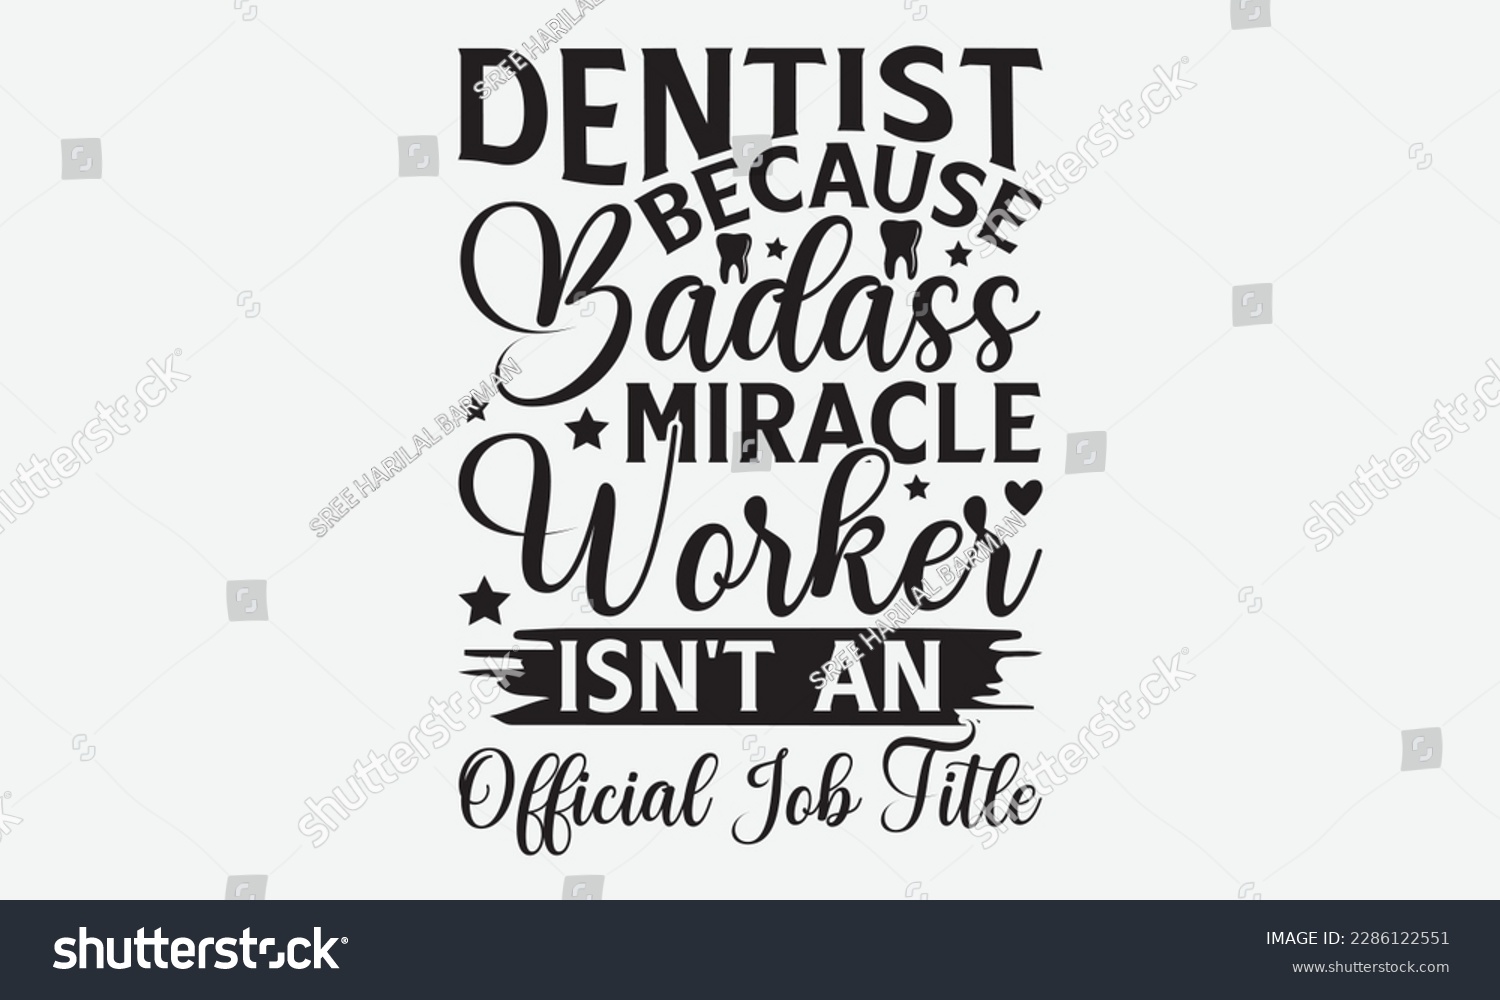 SVG of Dentist Because Badass Miracle Worker Isn't An Official Job Title - Dentist T-shirt Design, Conceptual handwritten phrase craft SVG hand-lettered, Handmade calligraphy vector illustration, template,  svg